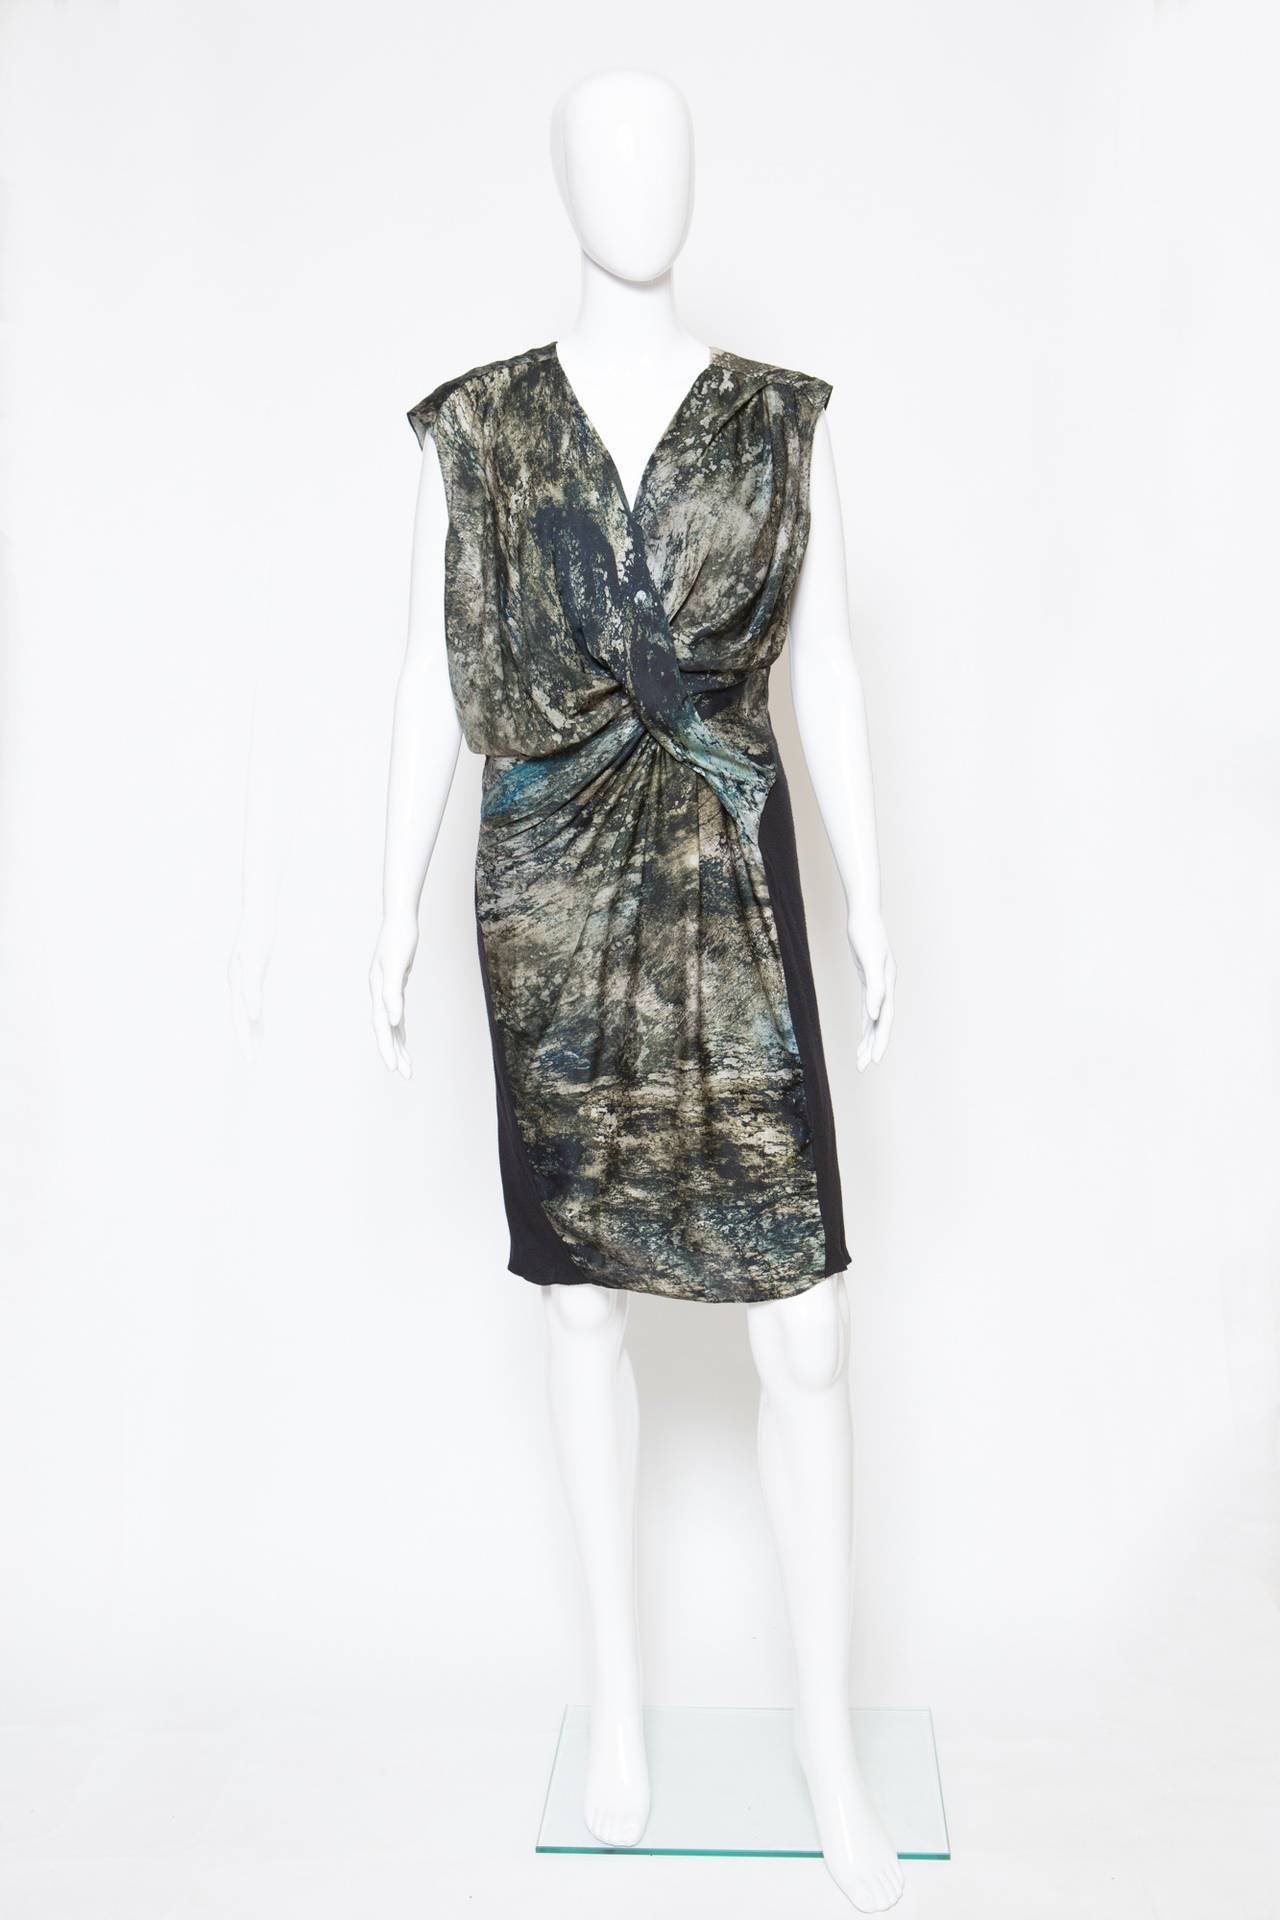 1990s Helmut Lang printed silk dress ( 90% silk+ 10% elasthanne ) mixed with contrasted black jersey details. The dress is fully lined and gets a center back zip.
Estimated size 38fr.
In excellent vintage condition. Made in France.
We guarantee you